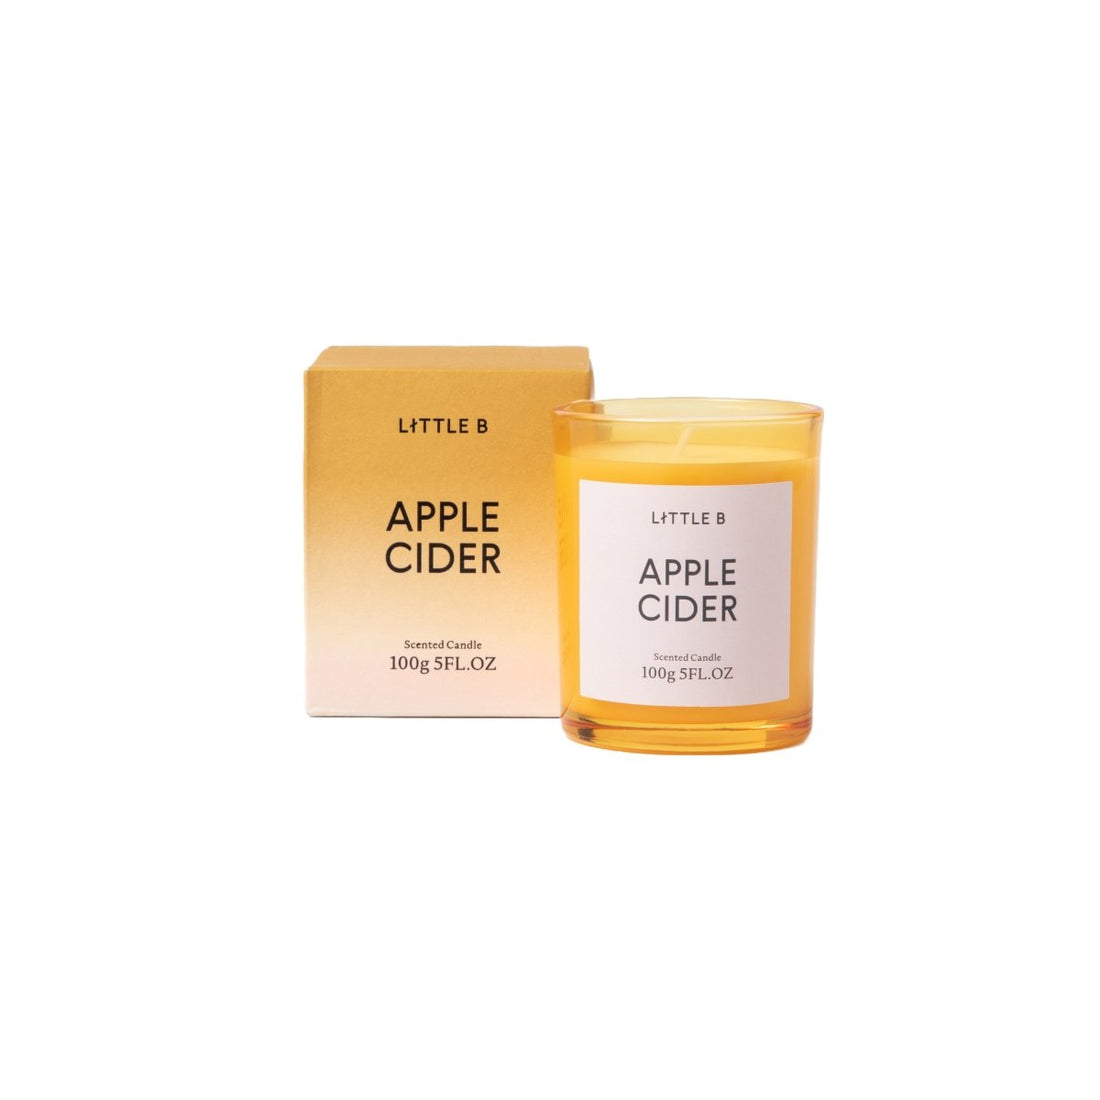 Apple Cider 100g Scented Candle - 0cm